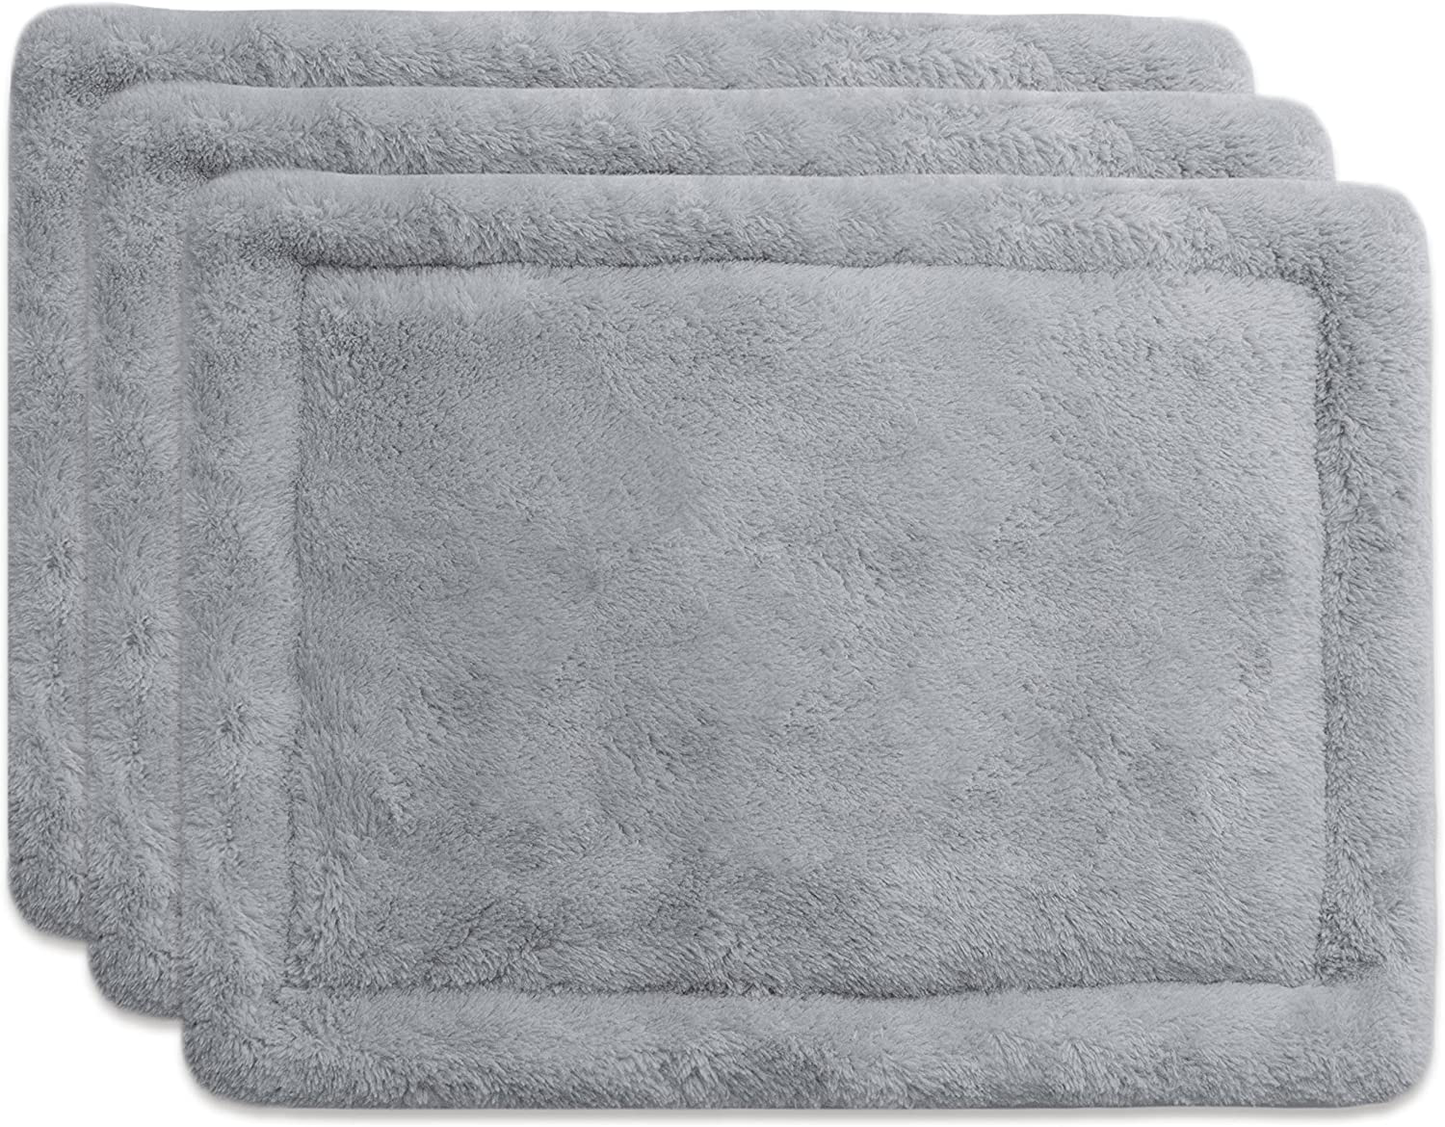 Tierecare Guinea Pig Cage Liner Fleece Bedding Super Absorbent Cage Liners Waterproof&Washable Guinea Pig Pee Pads for Small Animal Rabbit Reusable Animals & Pet Supplies > Pet Supplies > Small Animal Supplies > Small Animal Bedding Tierecare Grey  